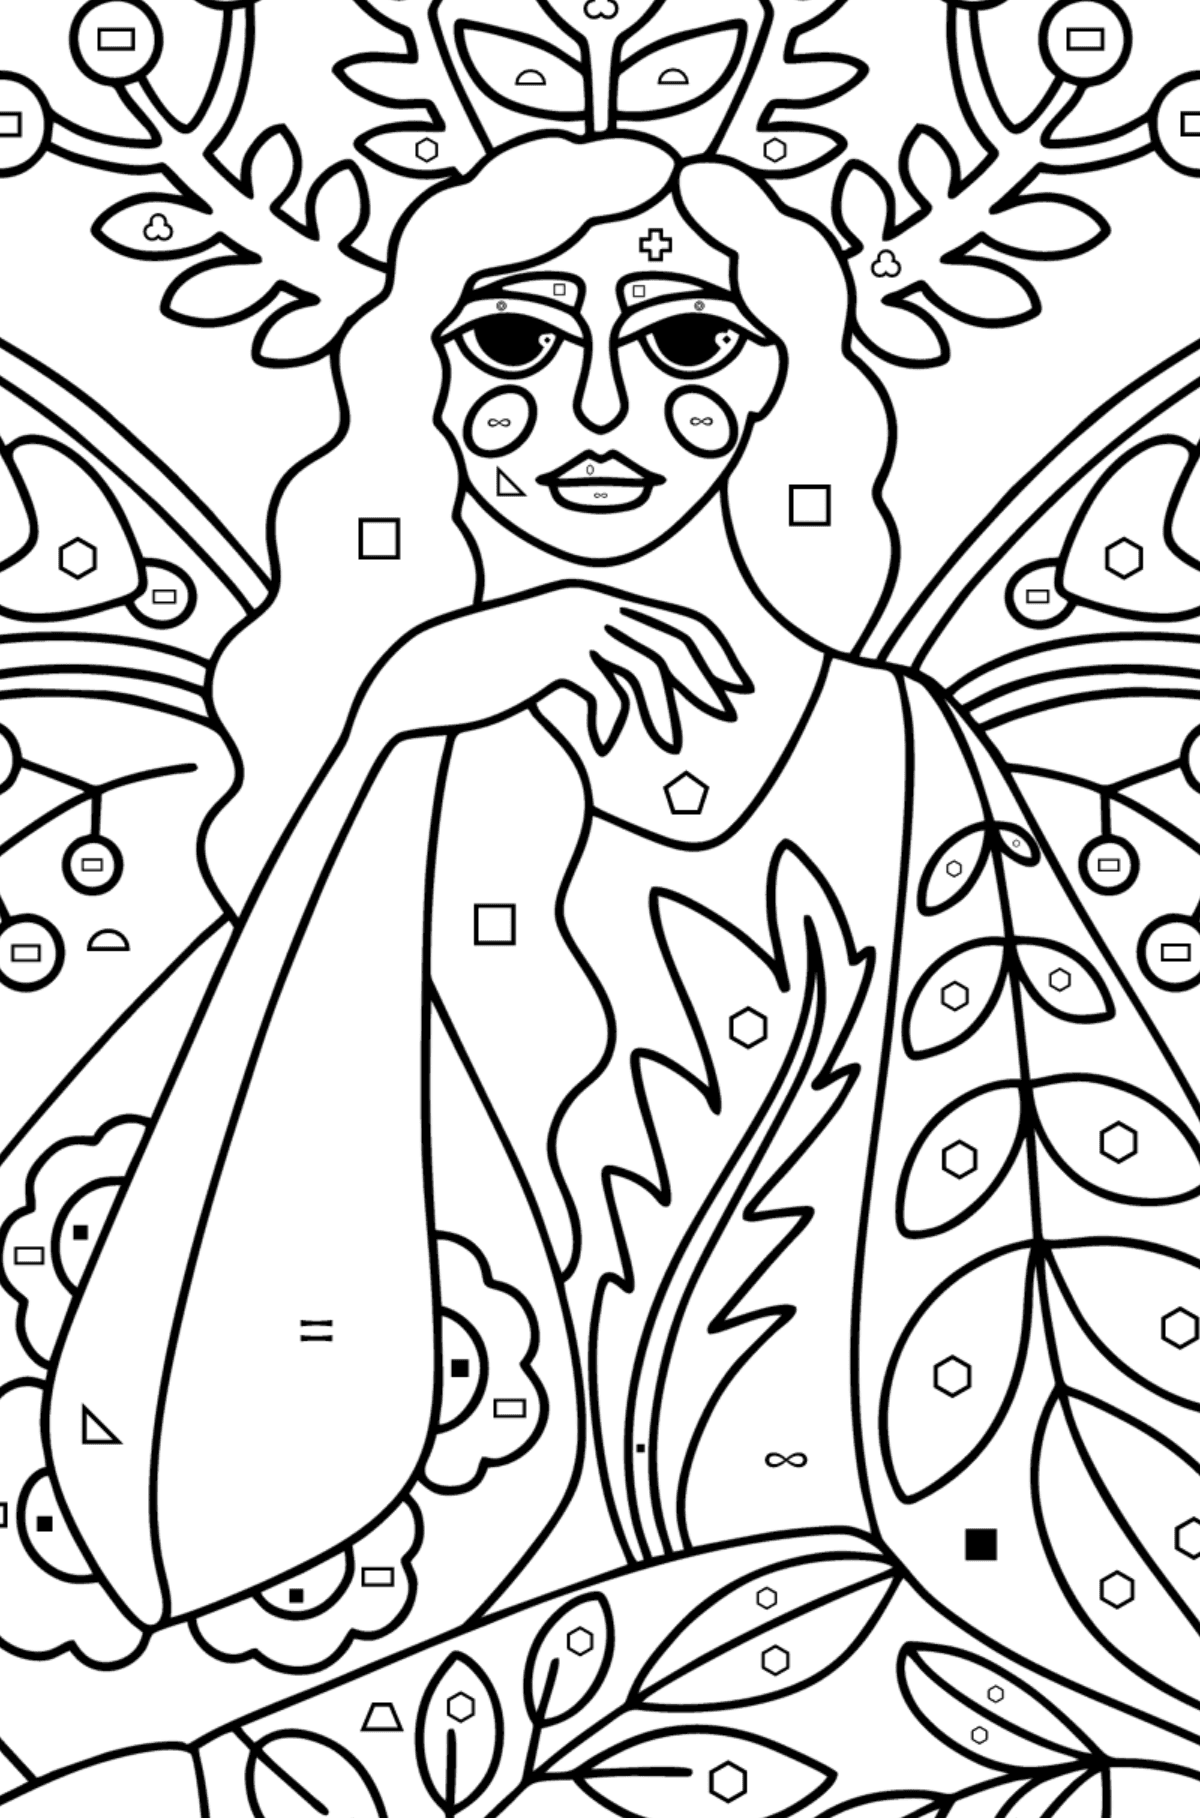 Fairy Tattoo (difficult) coloring page - Coloring by Symbols and Geometric Shapes for Kids